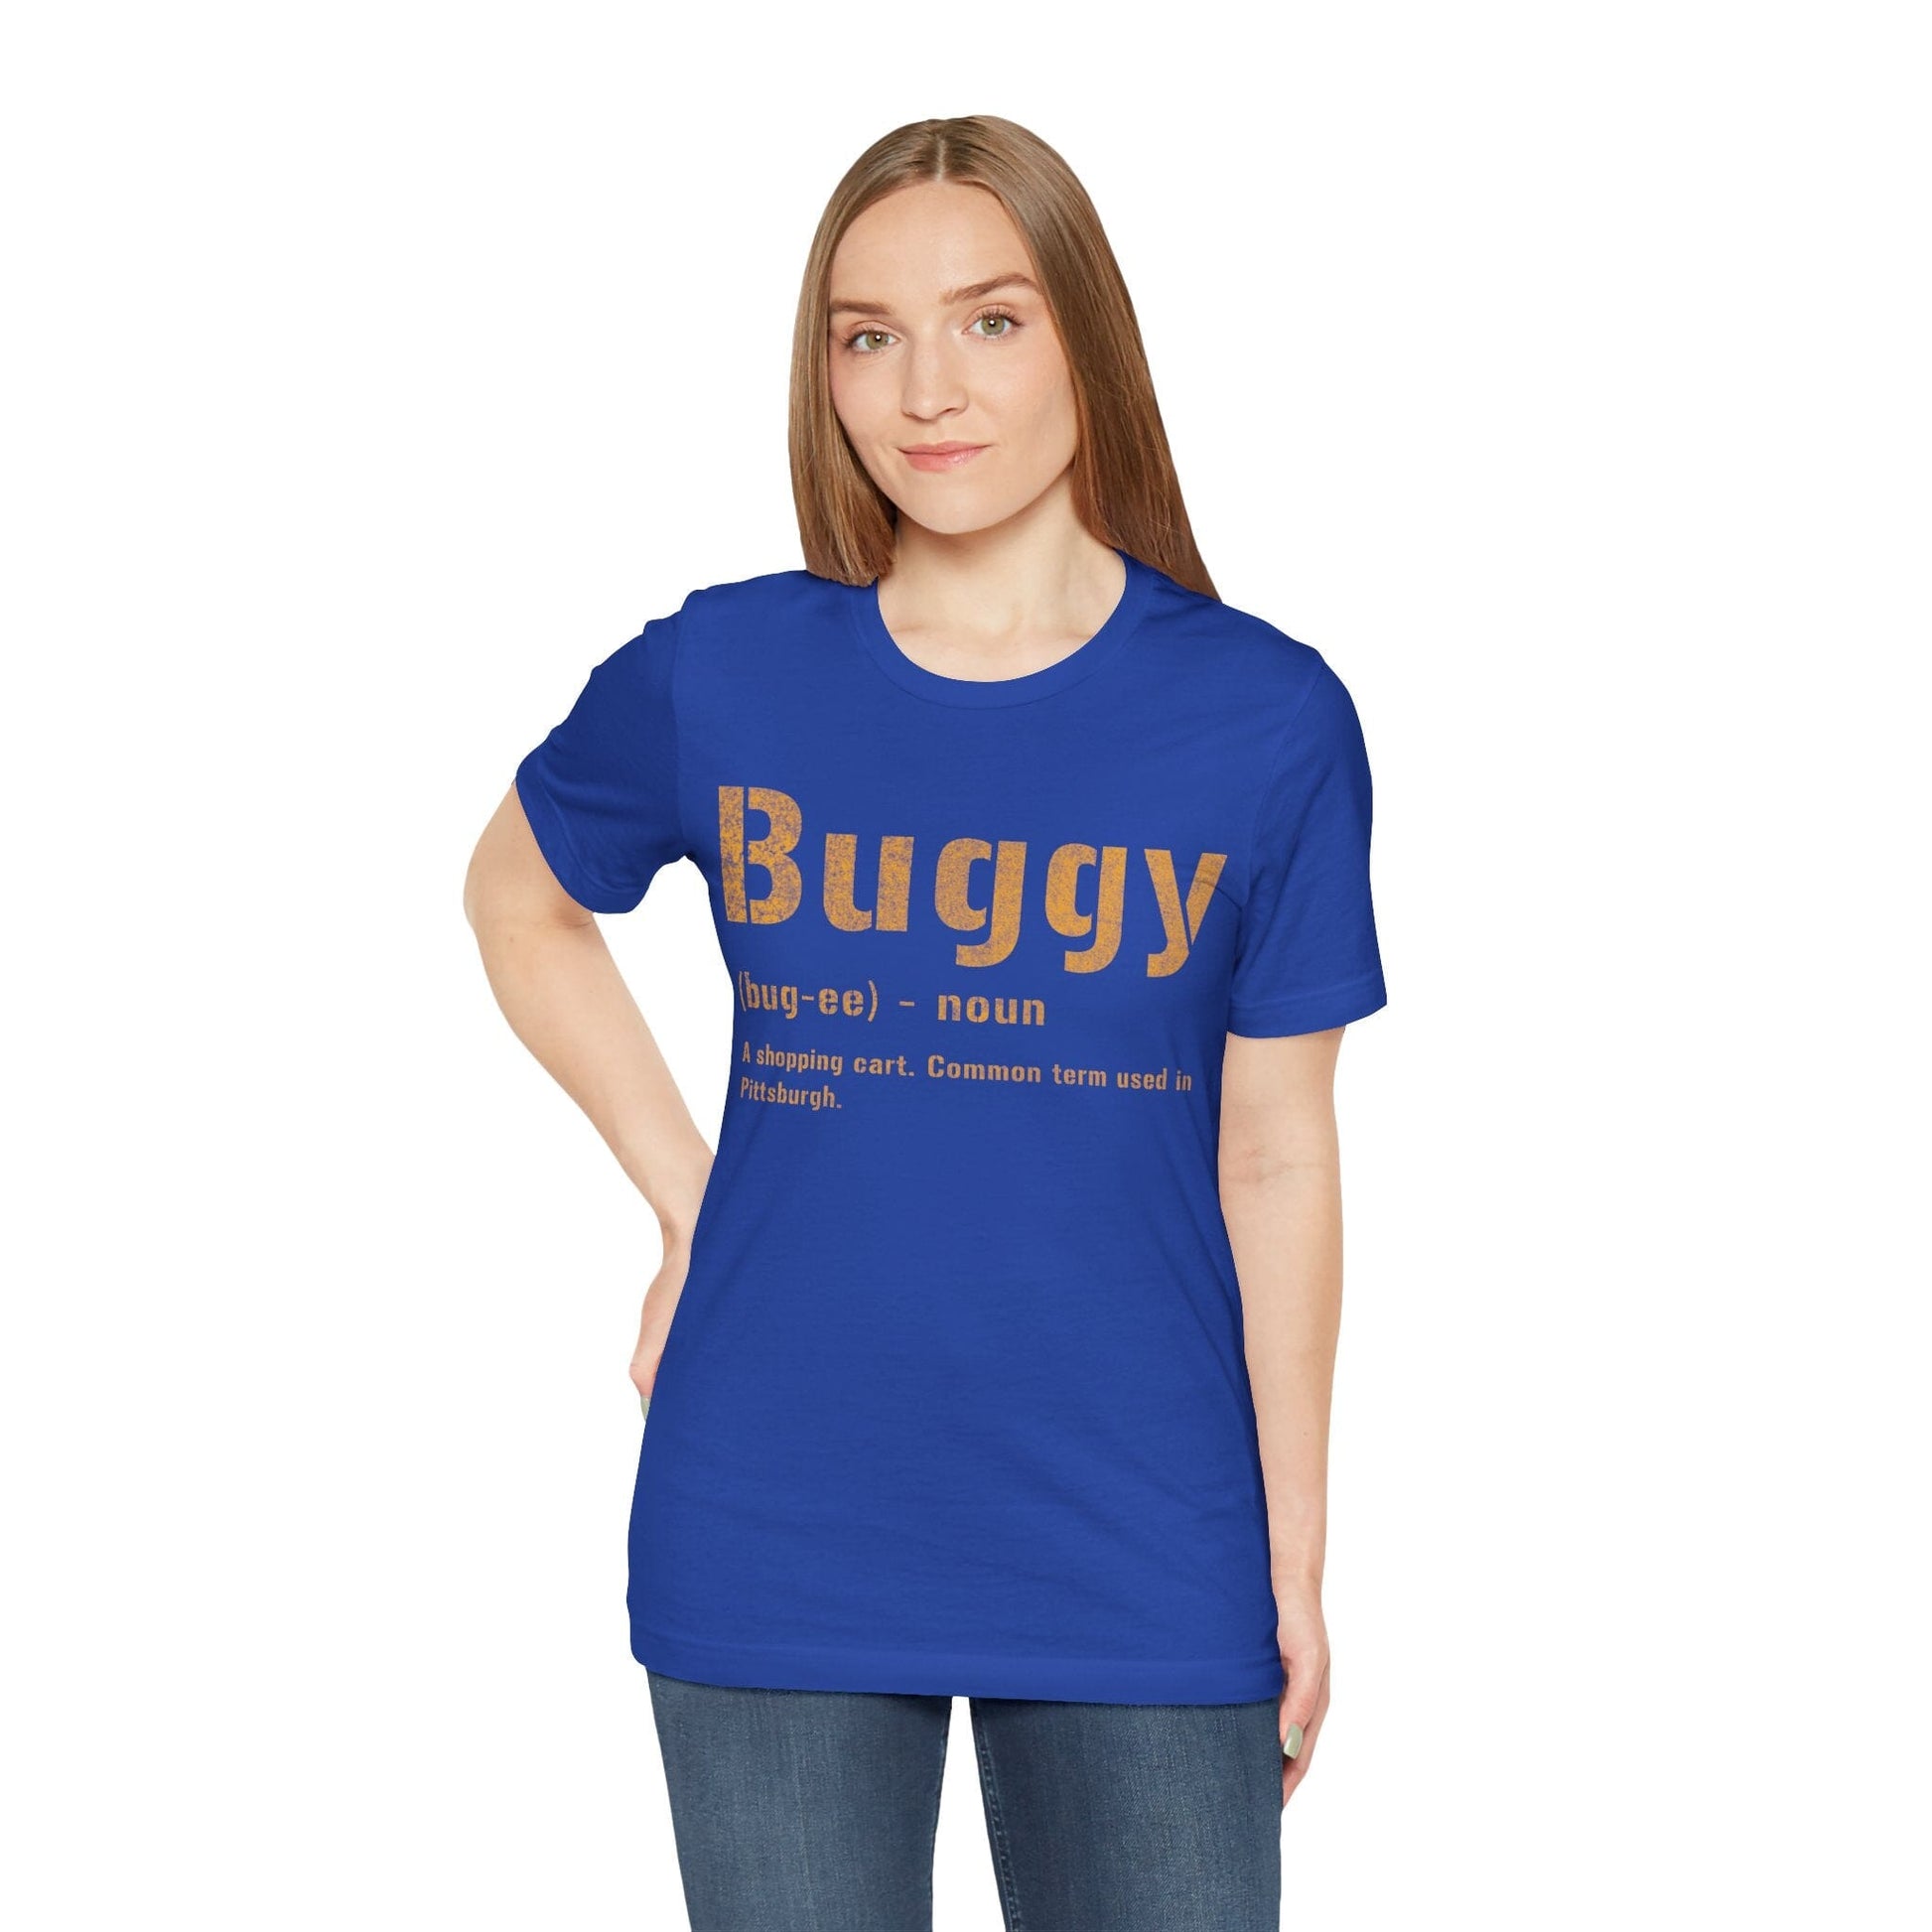 Buggy T-Shirt | Yinzer Gifts | Pittsburghese Apparel | Pittsburgh Pride T-Shirt Yinzergear 